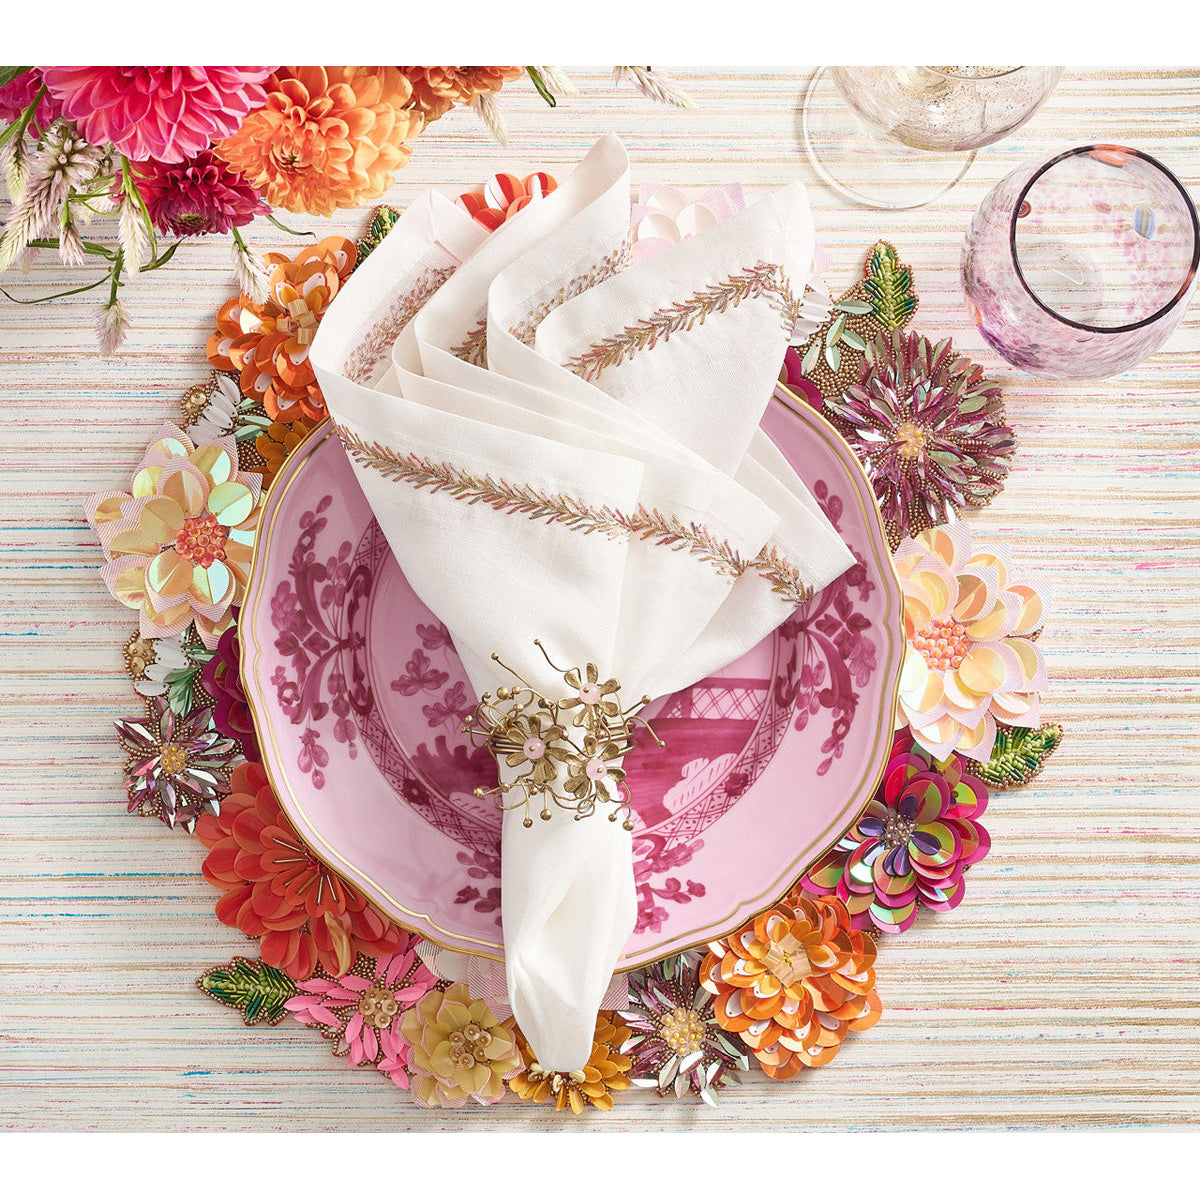 Dahlia Placemat - Set of 2 by Kim Seybert Additional Image-3